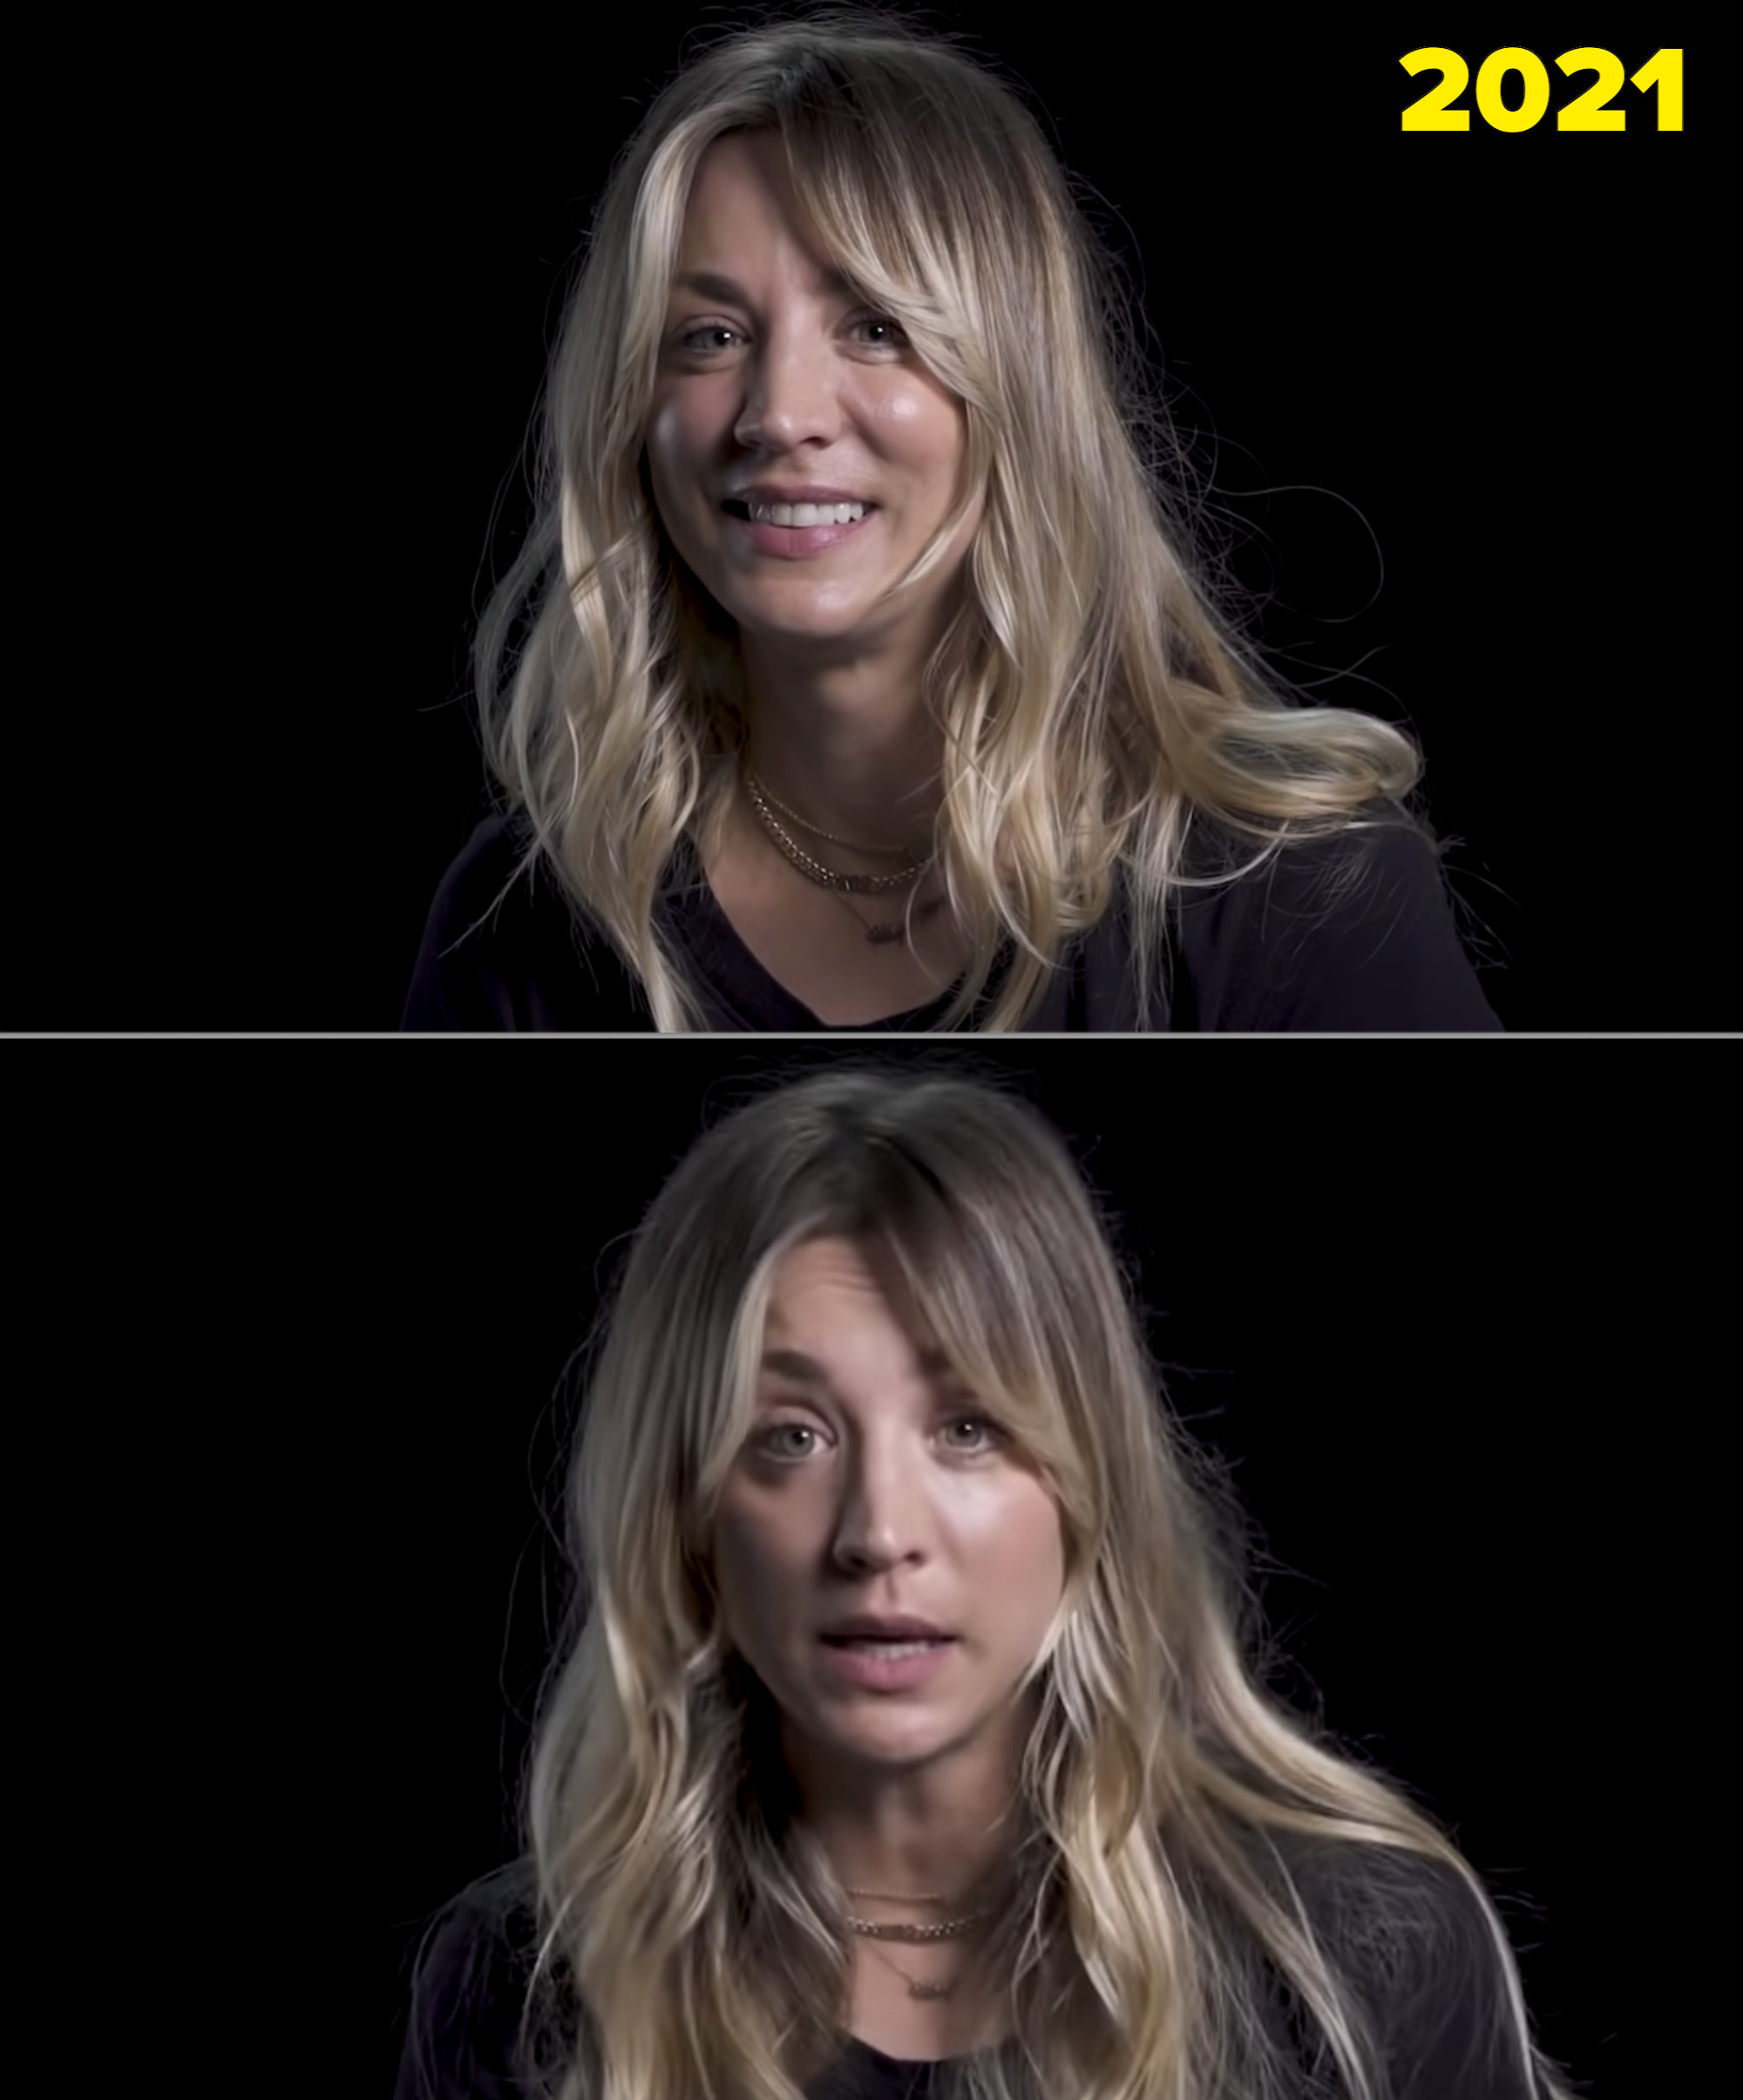 Kaley Cuoco being interviewed in front of a black backdrop in 2021